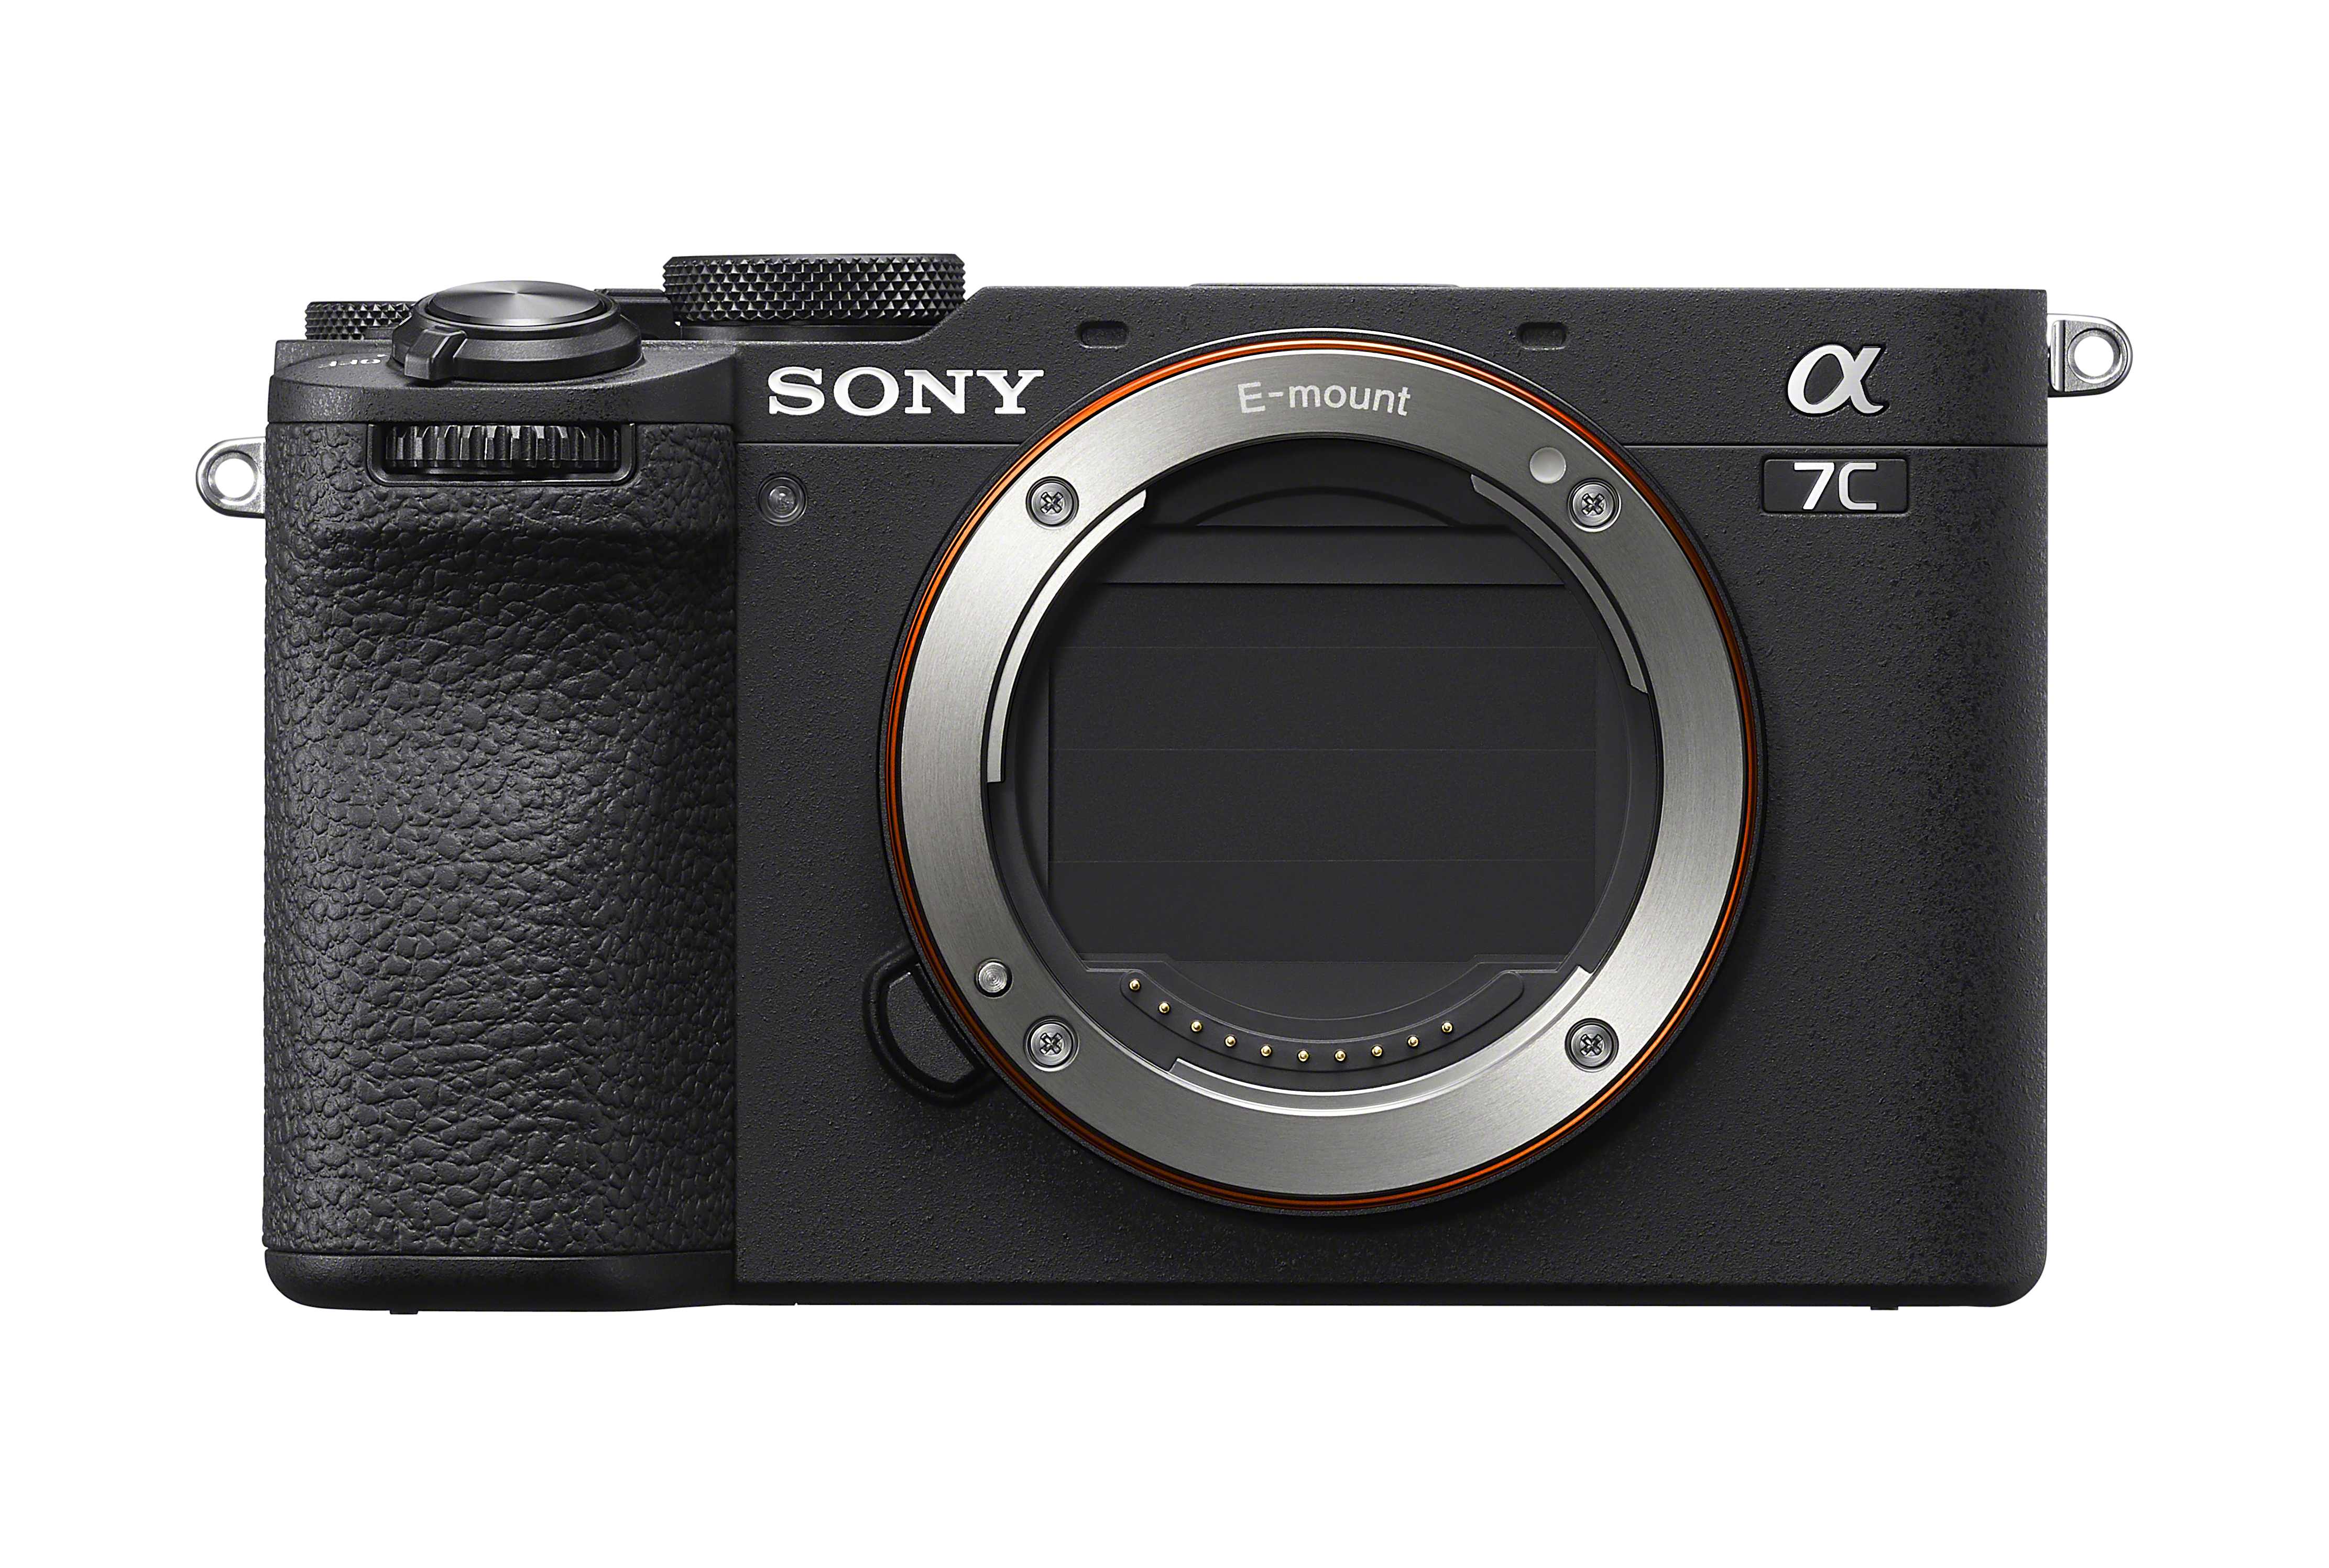 Sony ILCE-7CM2 Body only (Black) - Click Image to Close